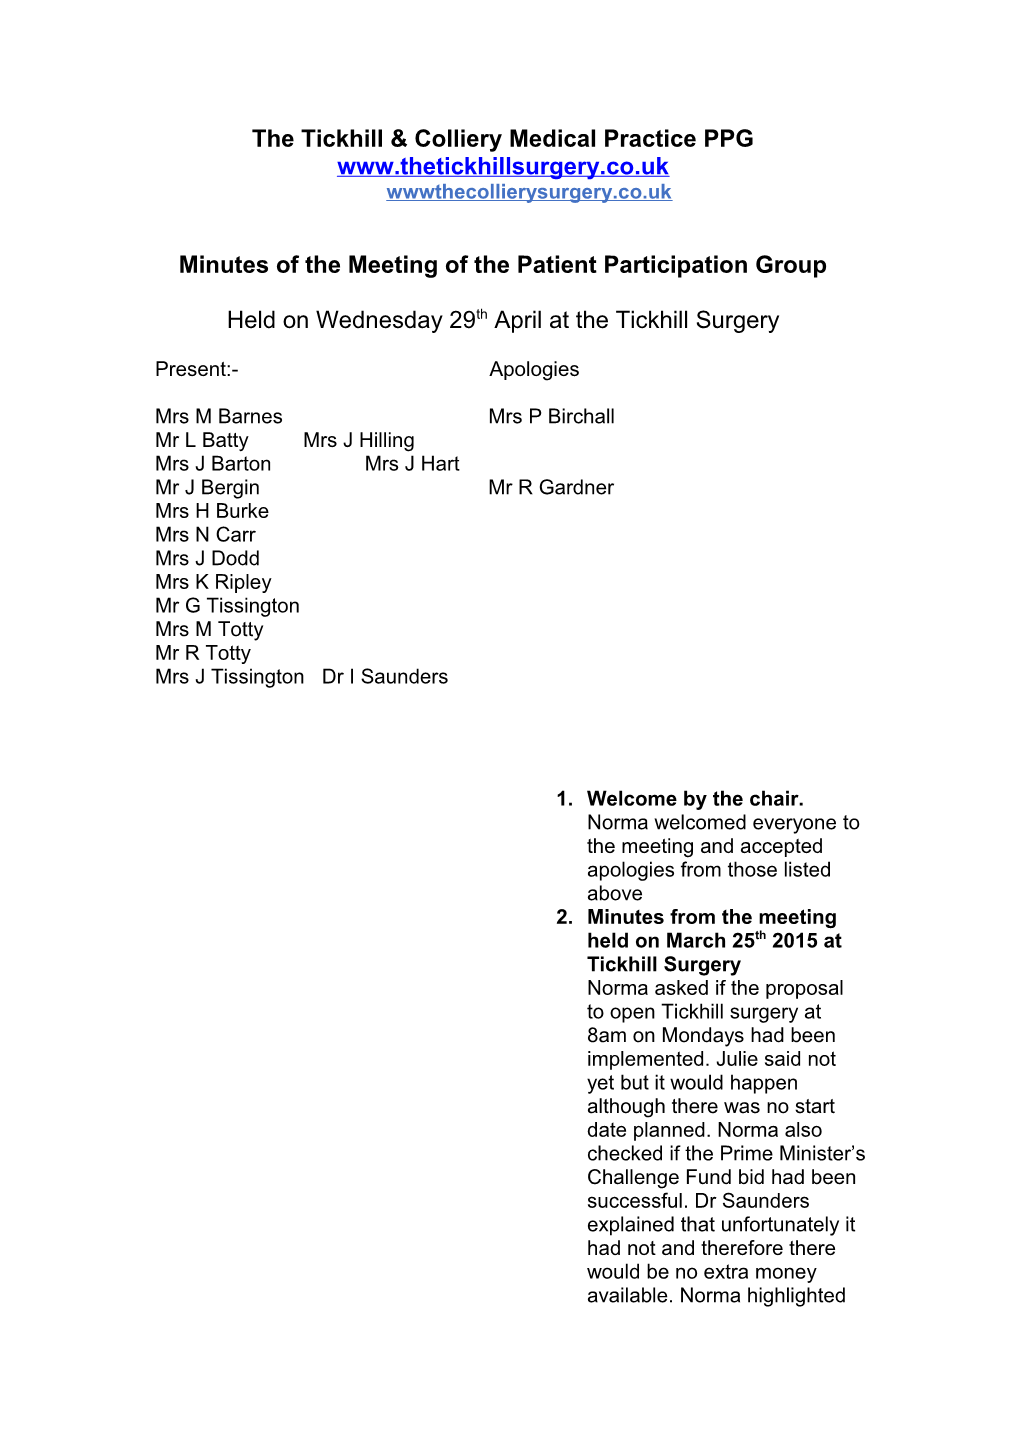 Minutes of the Meeting of the Patient Participation Group